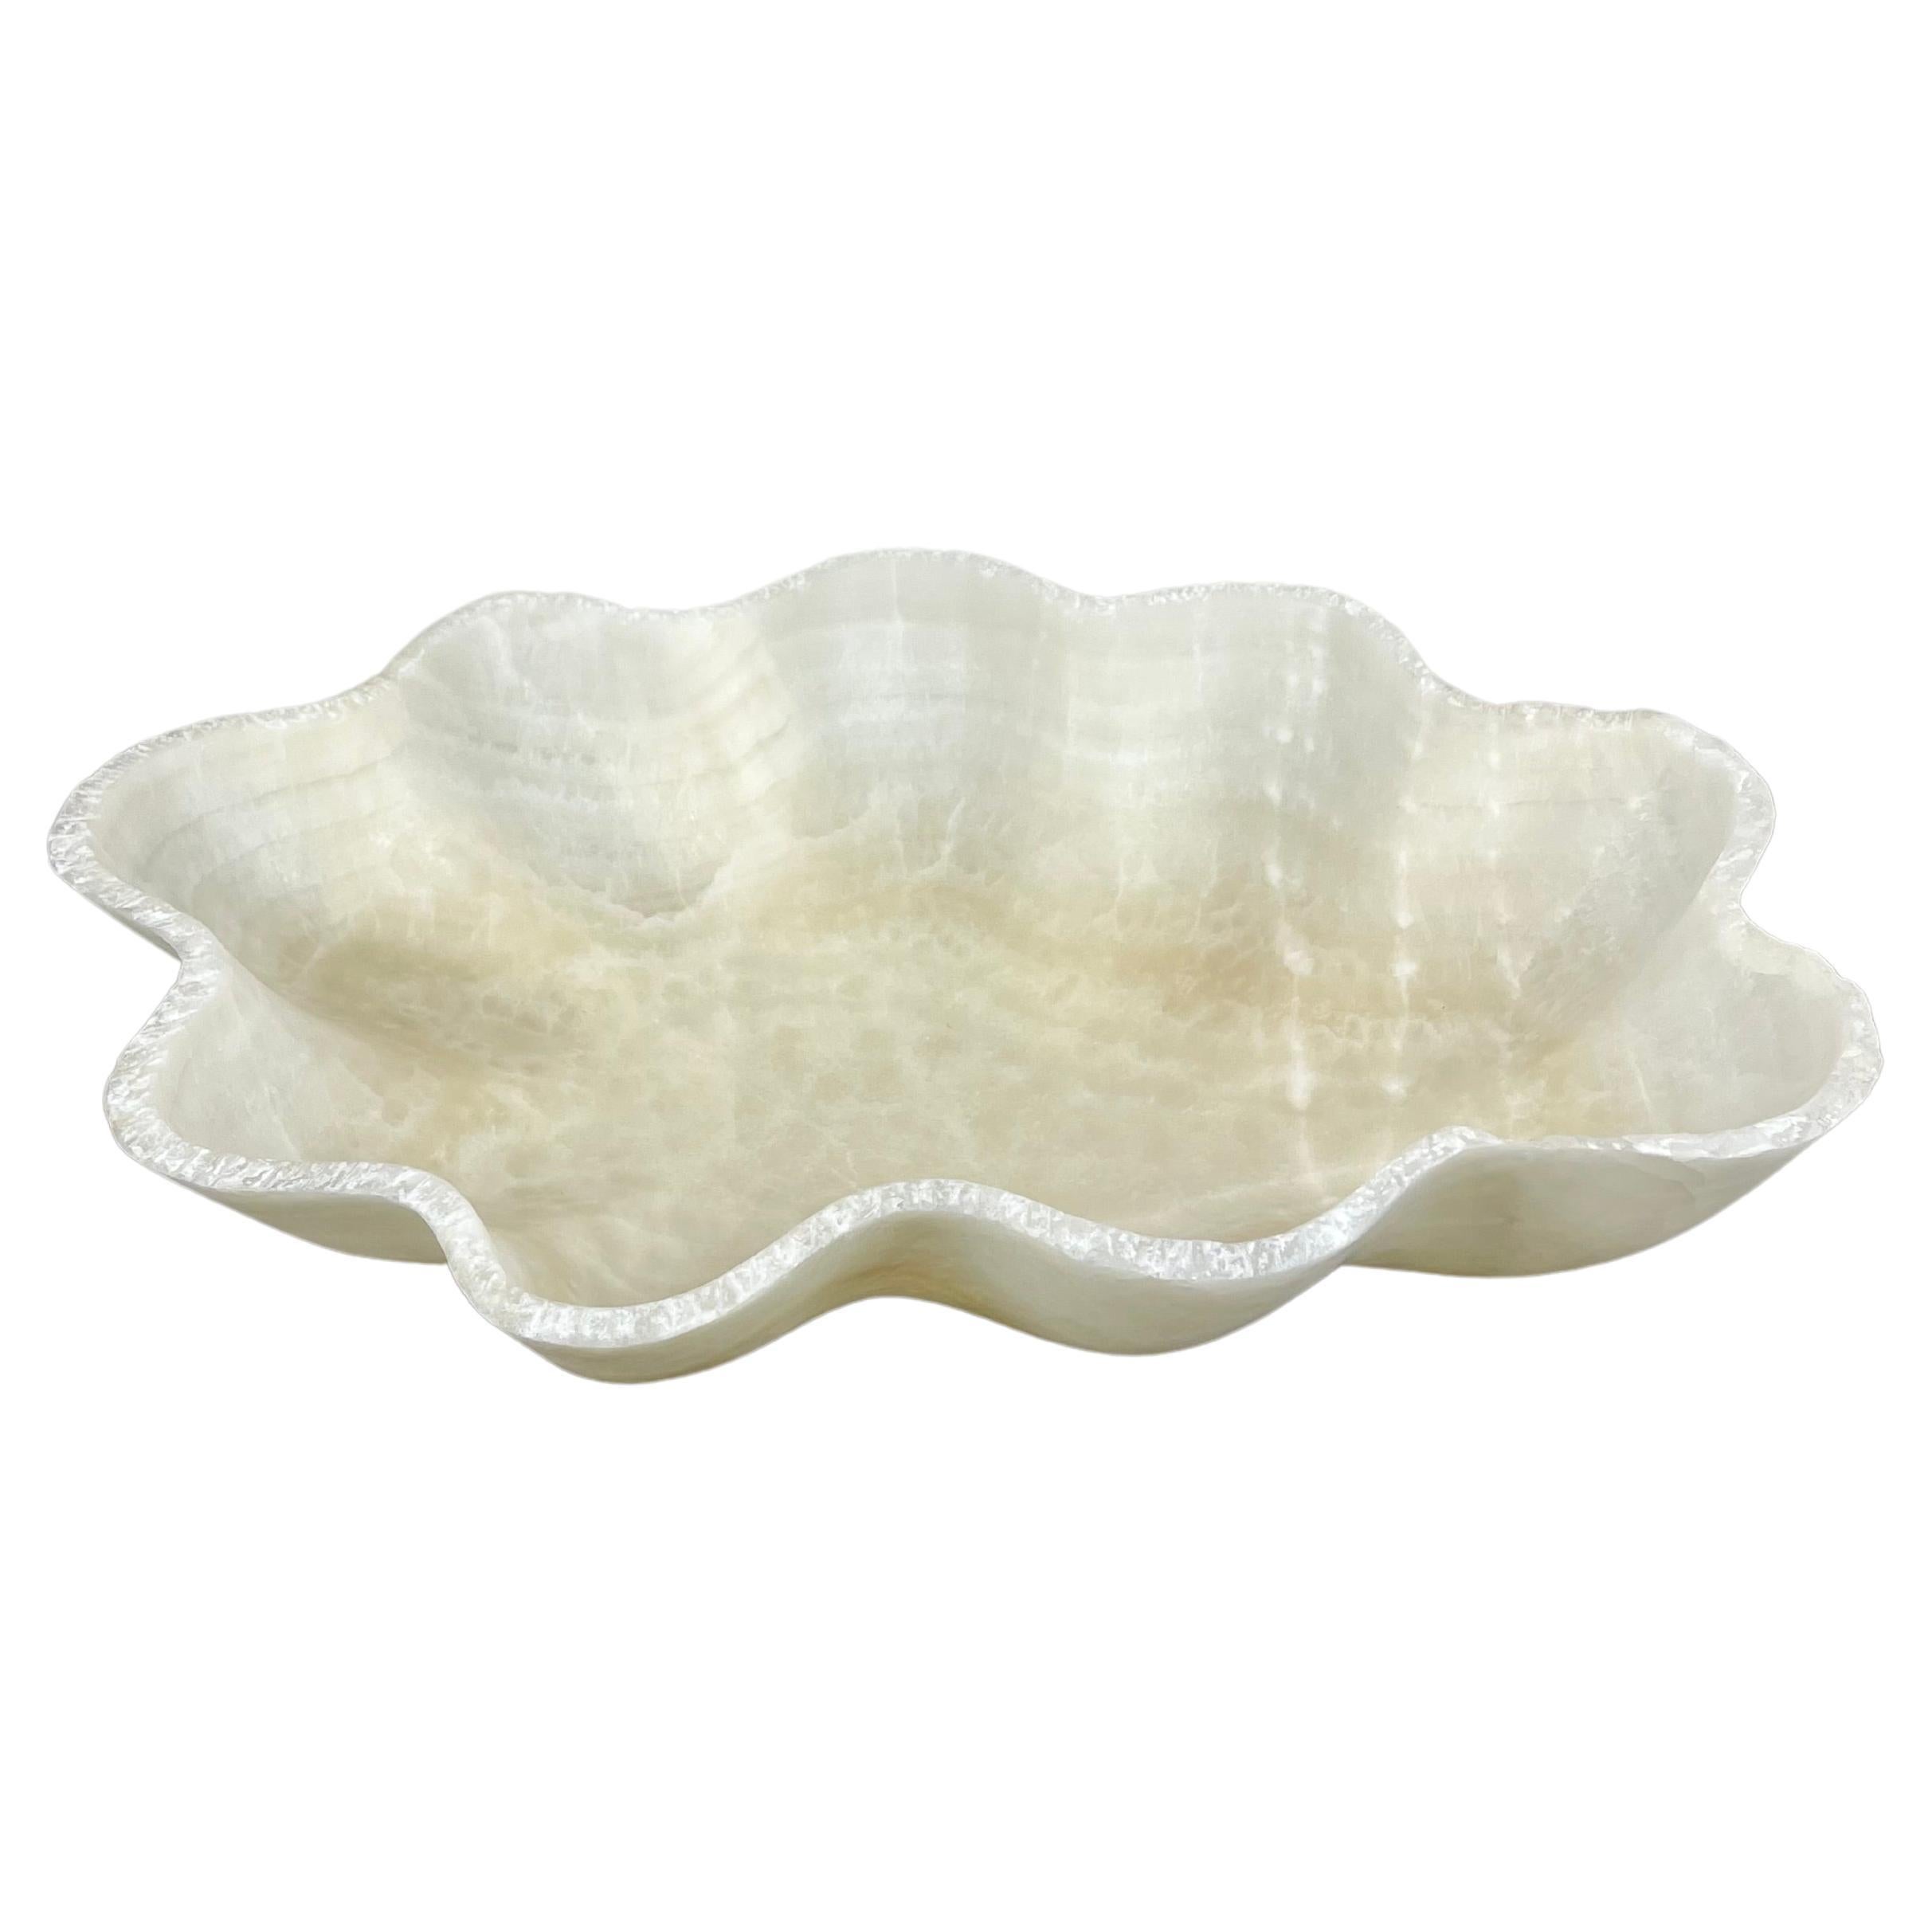 Scalloped Hand-Carved Onyx Bowl